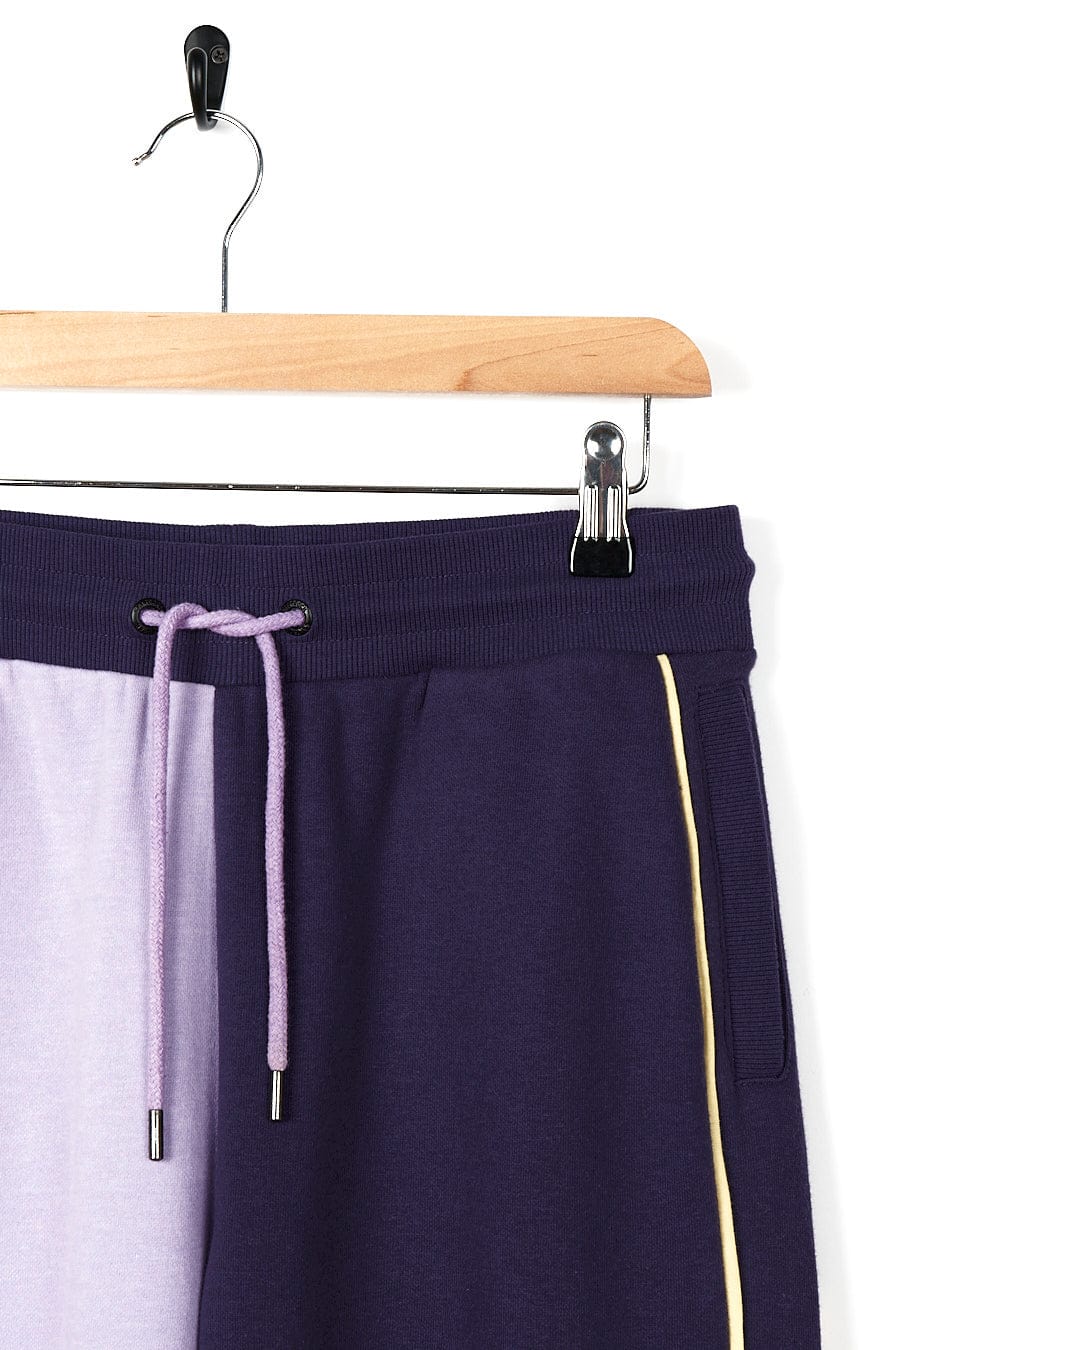 A pair of Betty - Womens Jogger - Light Purple sweat shorts by Saltrock hanging on a hanger.